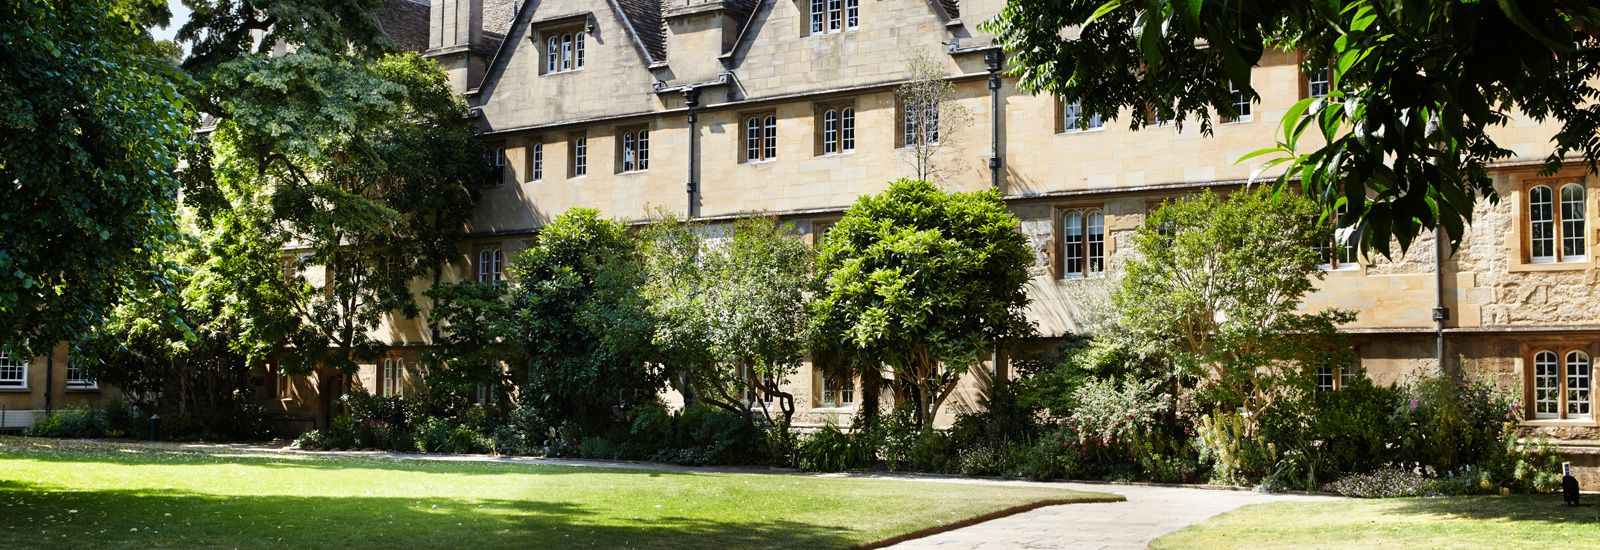 Trees and buildings in Wadham College